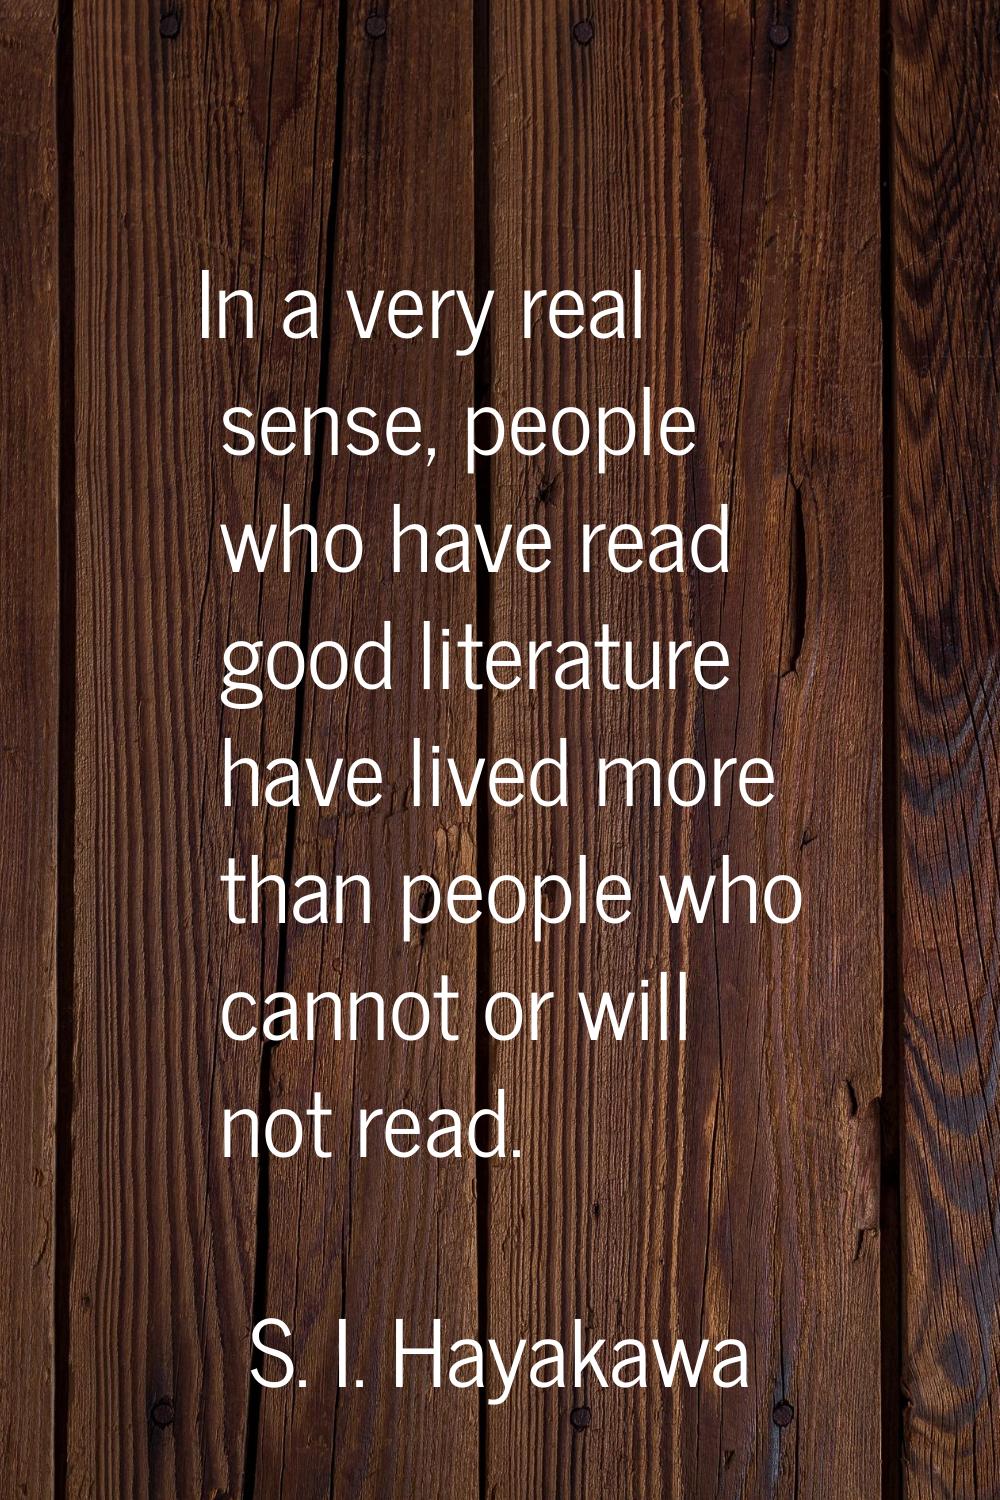 In a very real sense, people who have read good literature have lived more than people who cannot o